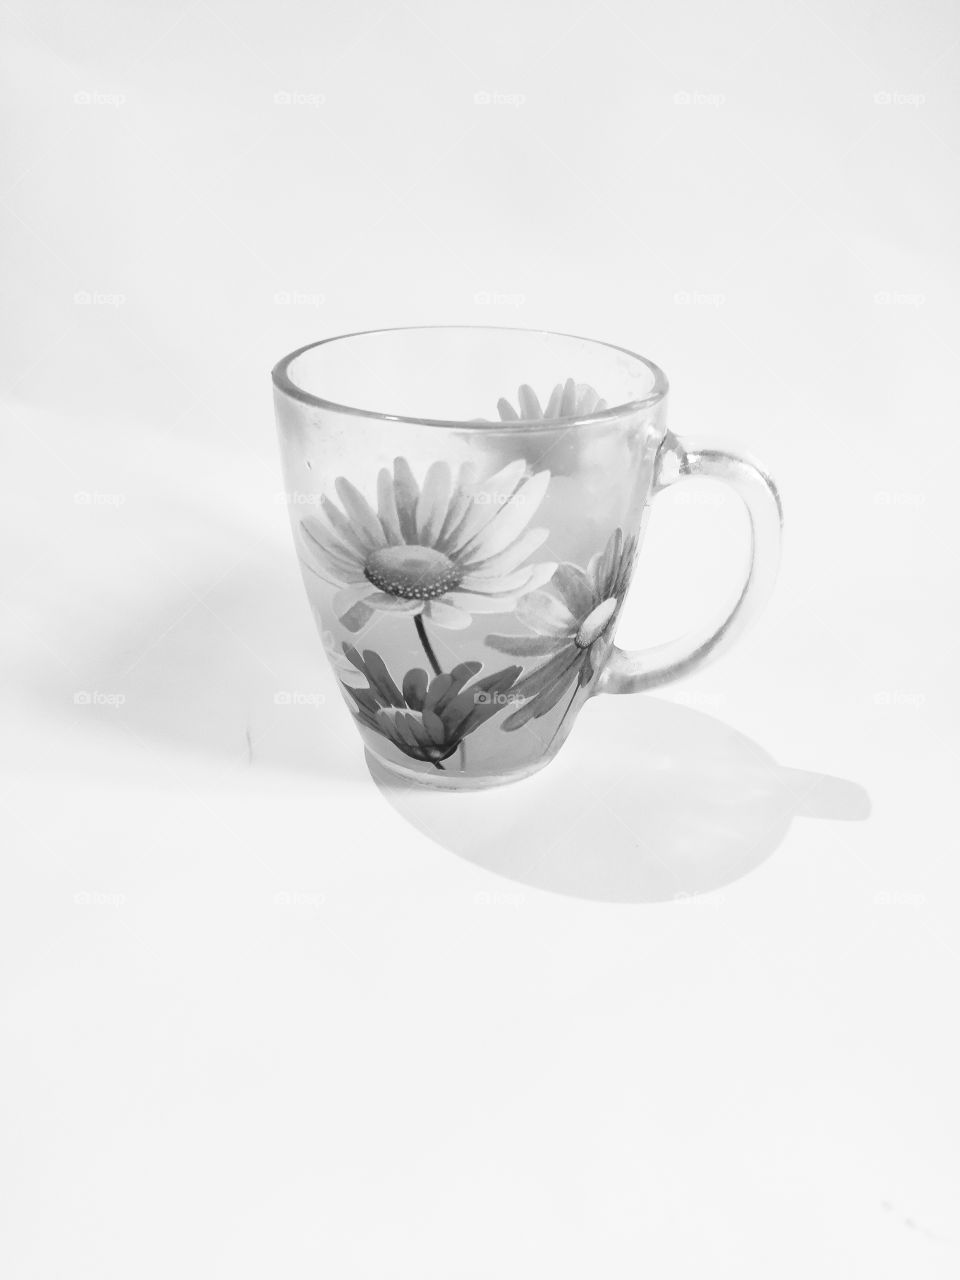 On a white background, a cup in black and white retro photo